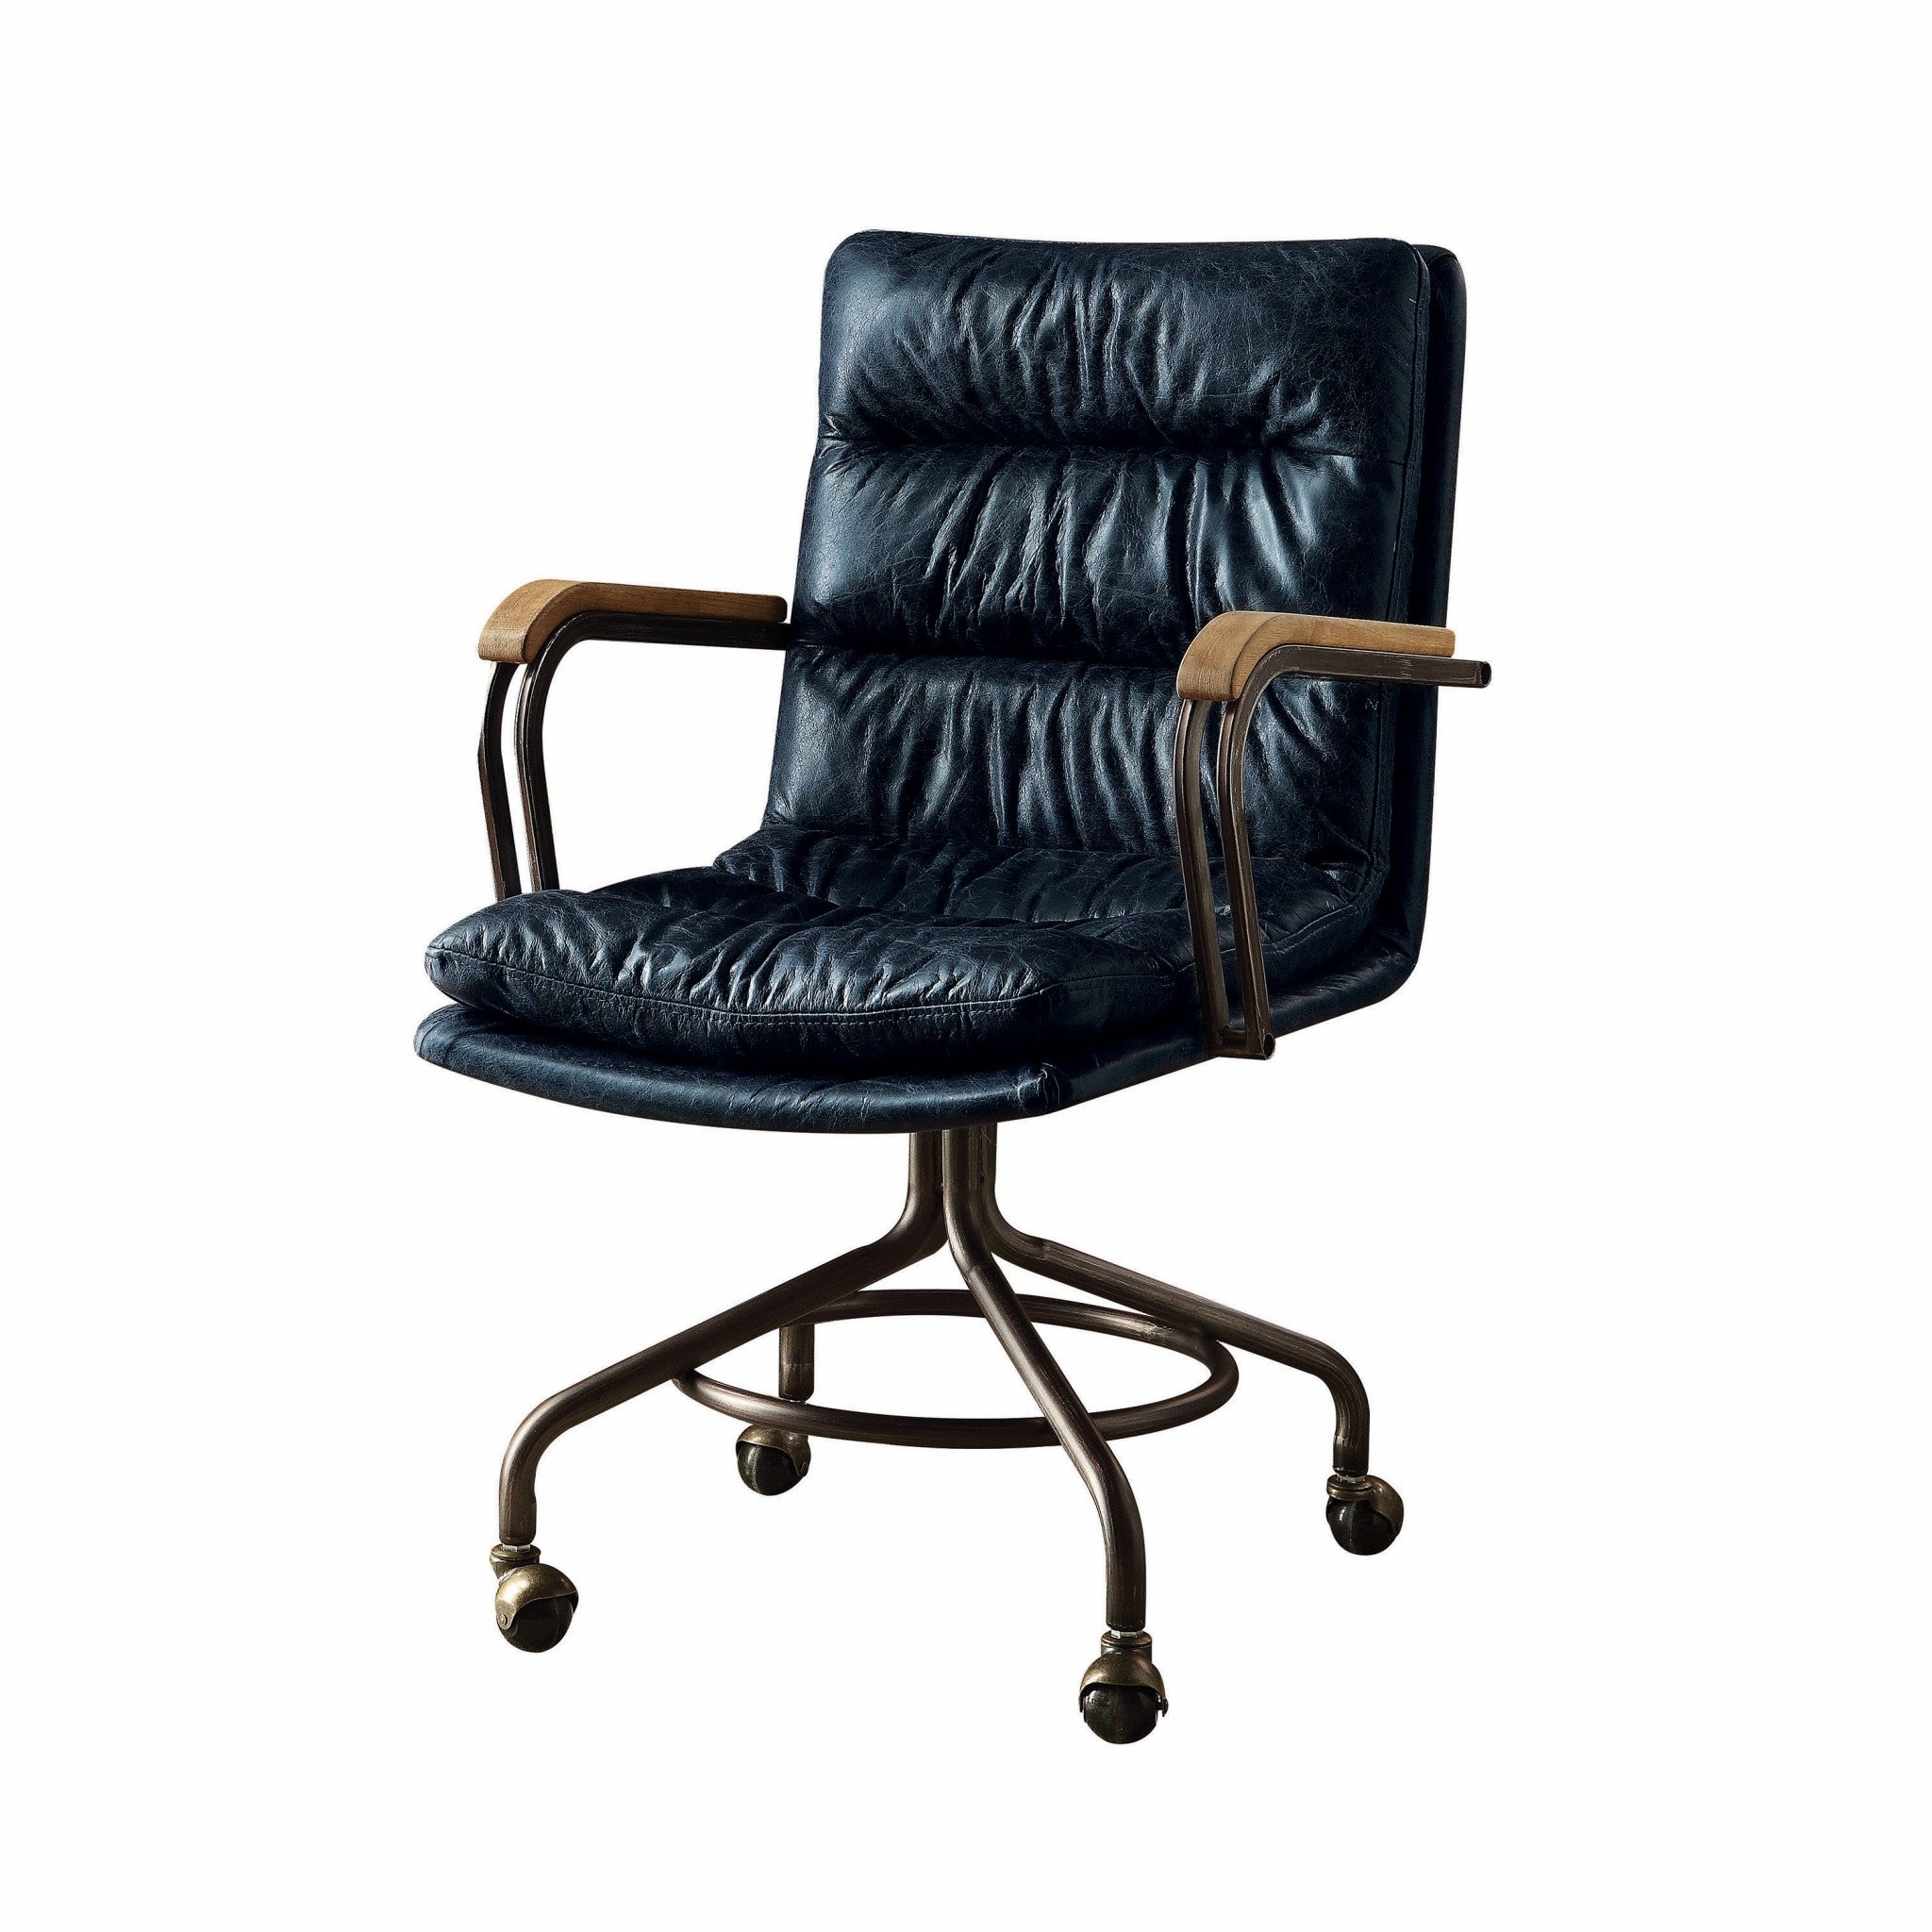 Coffee-and-Dark-Brown-Swivel-Leather-Rolling-Executive-Office-Chair-Office-Chairs